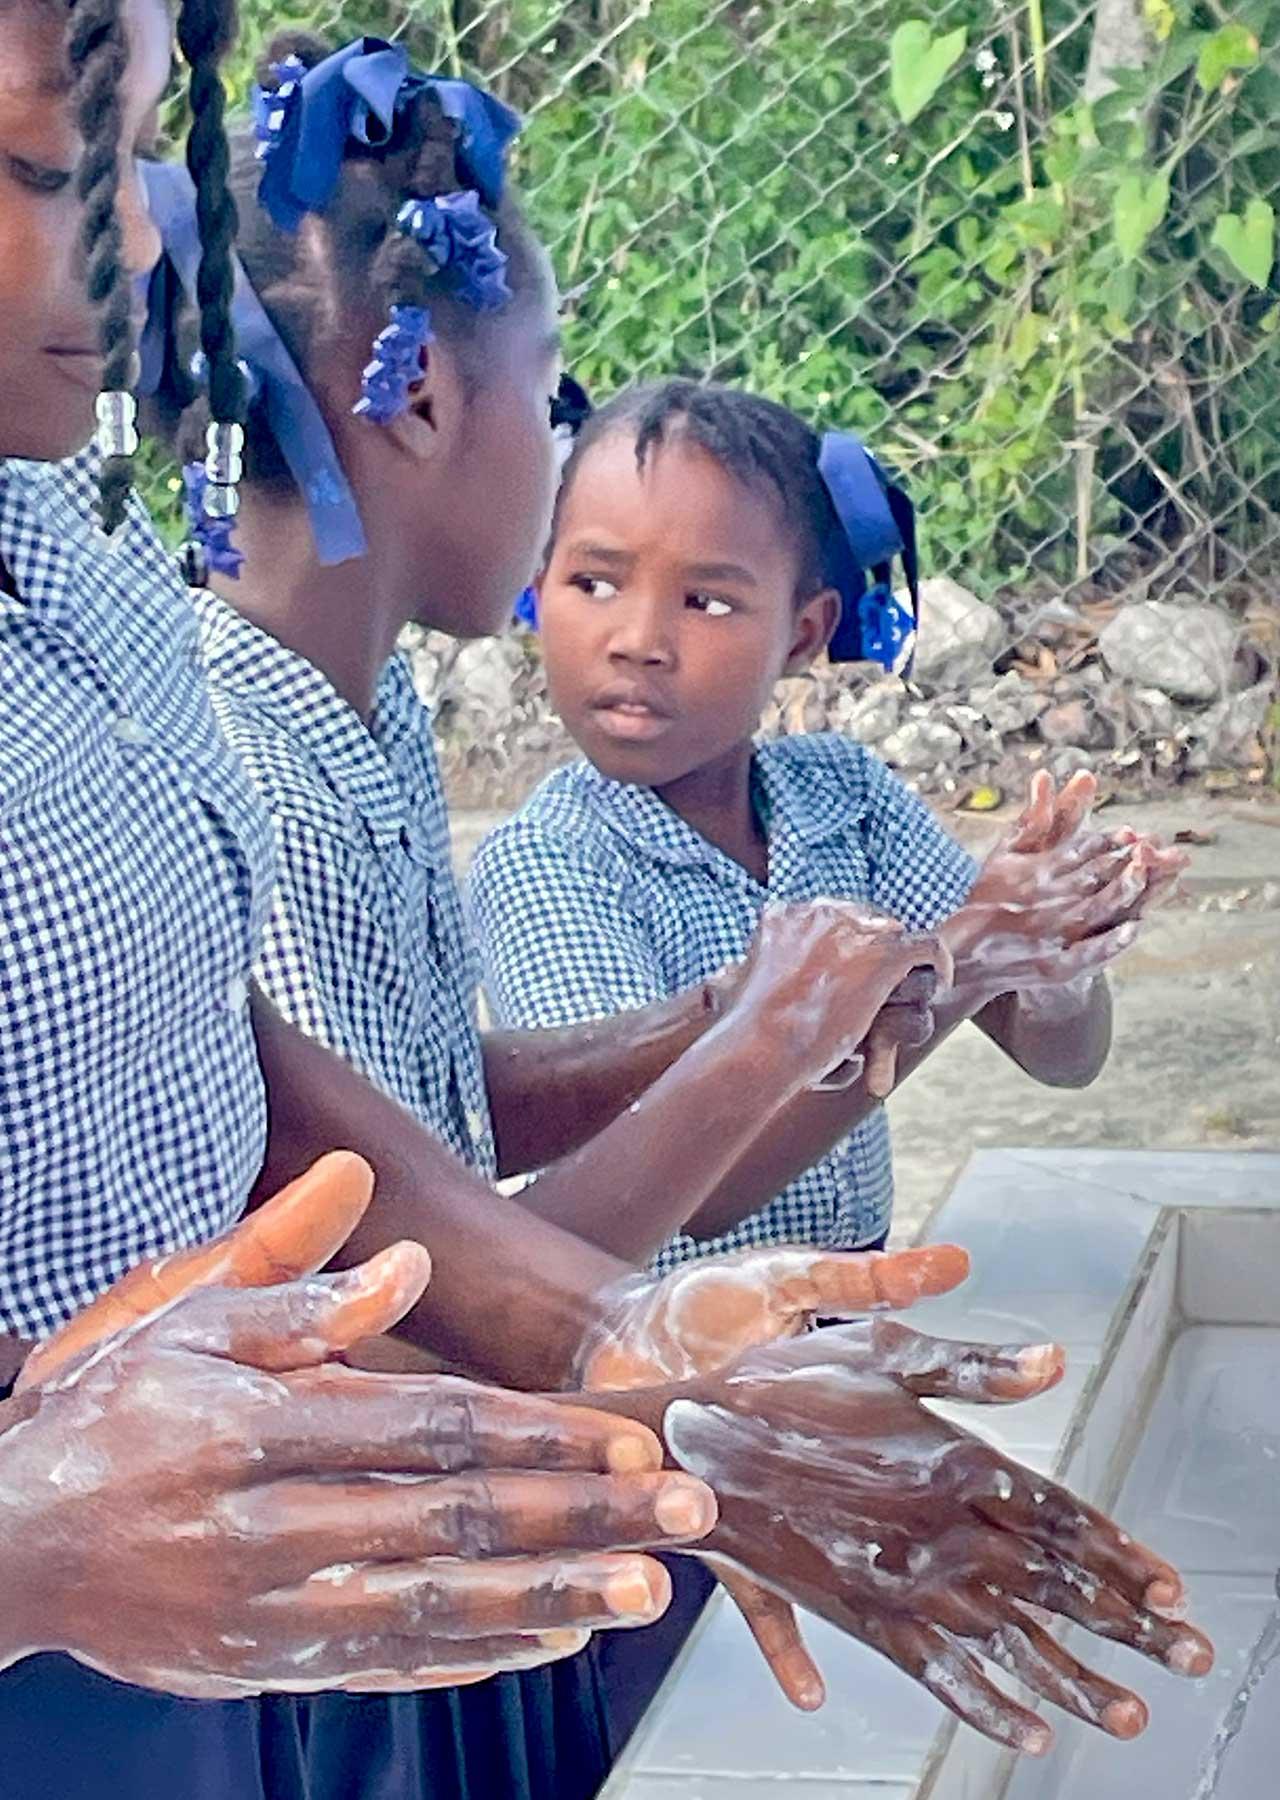 Children wash their hands at Legere school in Cavillon. LWF and partners installed water and sanitation in the school – before , the children had to walk one hour to find safe drinking water. Photo: LWF/ M. French